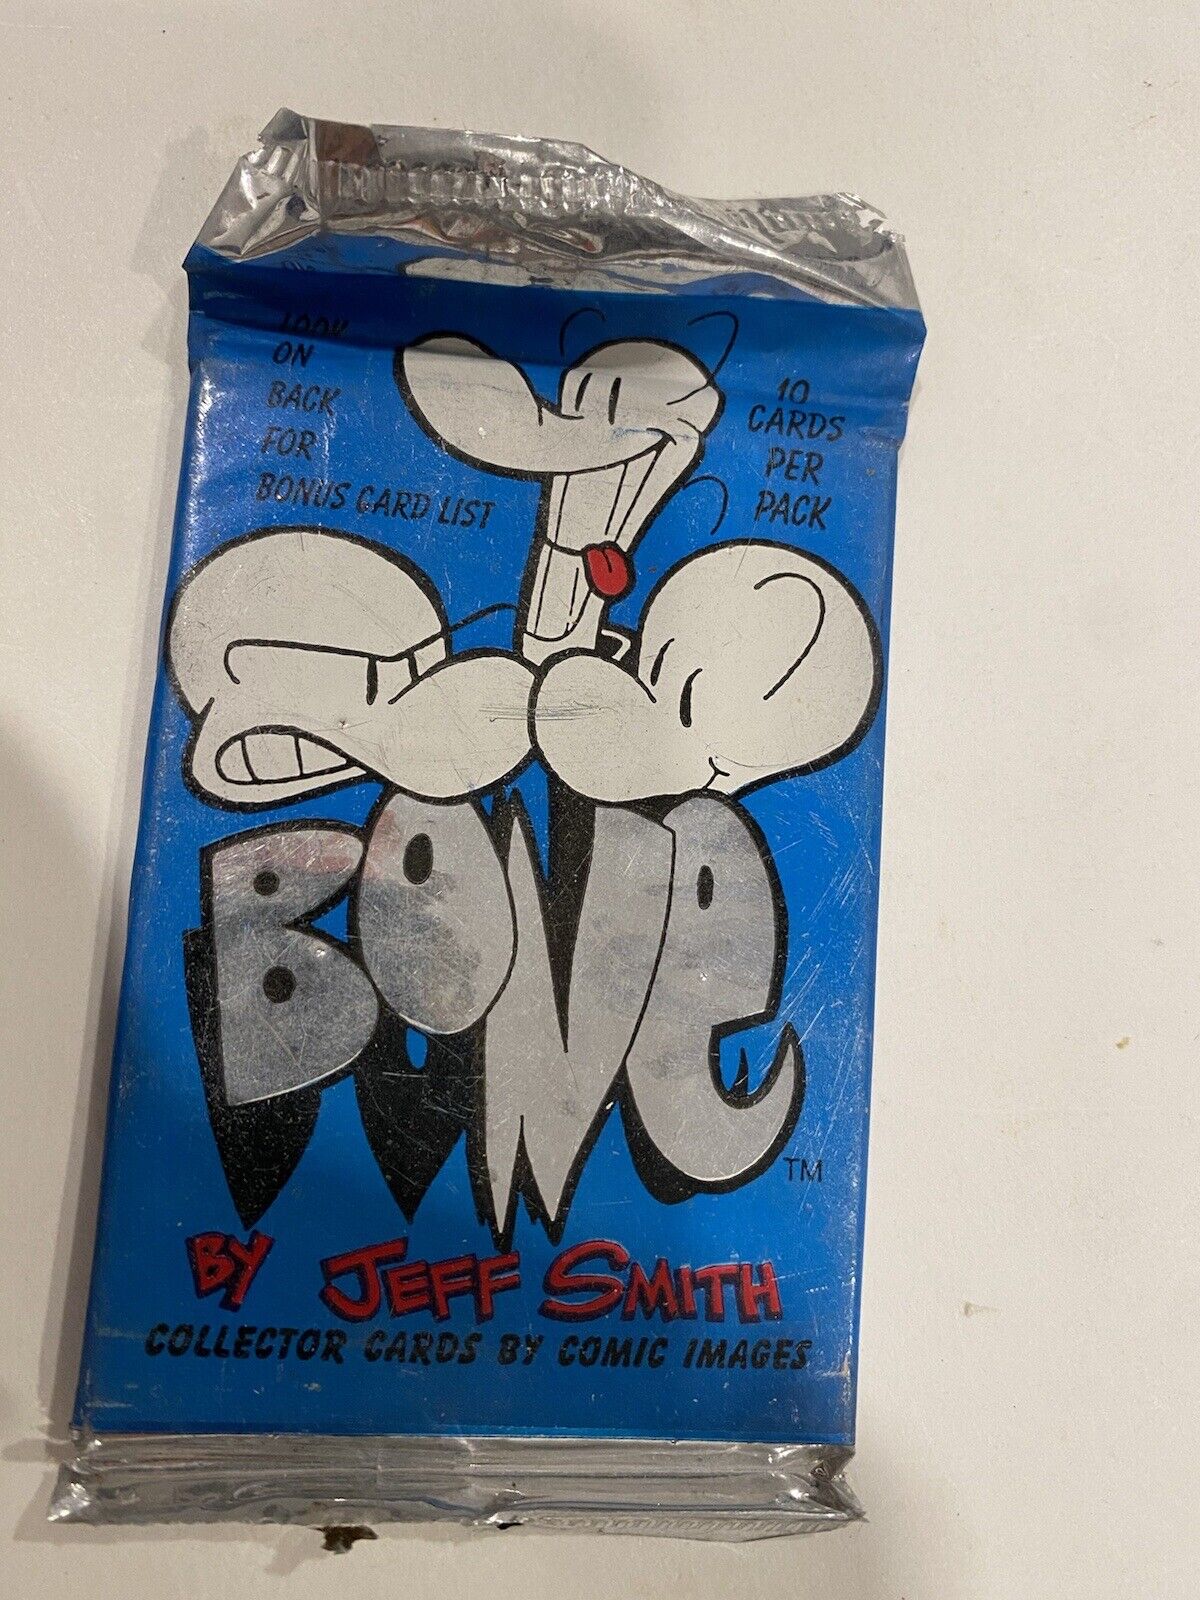 SEALED PACK 1994 BONE COMIC IMAGES BY JEFF SMITH 10 CARD COLLECTOR CARDS